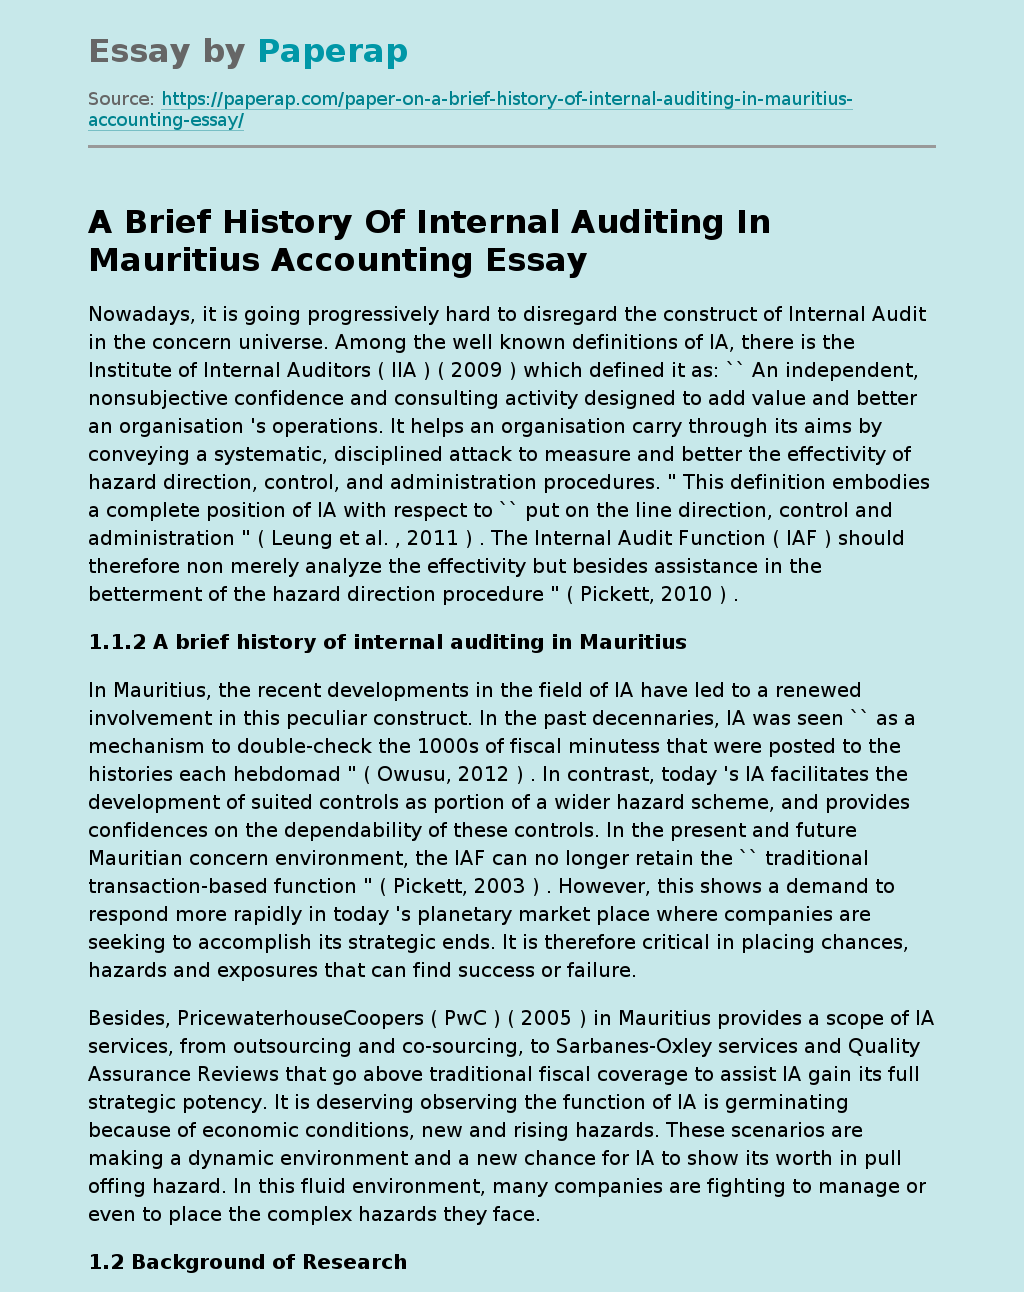 A Brief History Of Internal Auditing In Mauritius Accounting